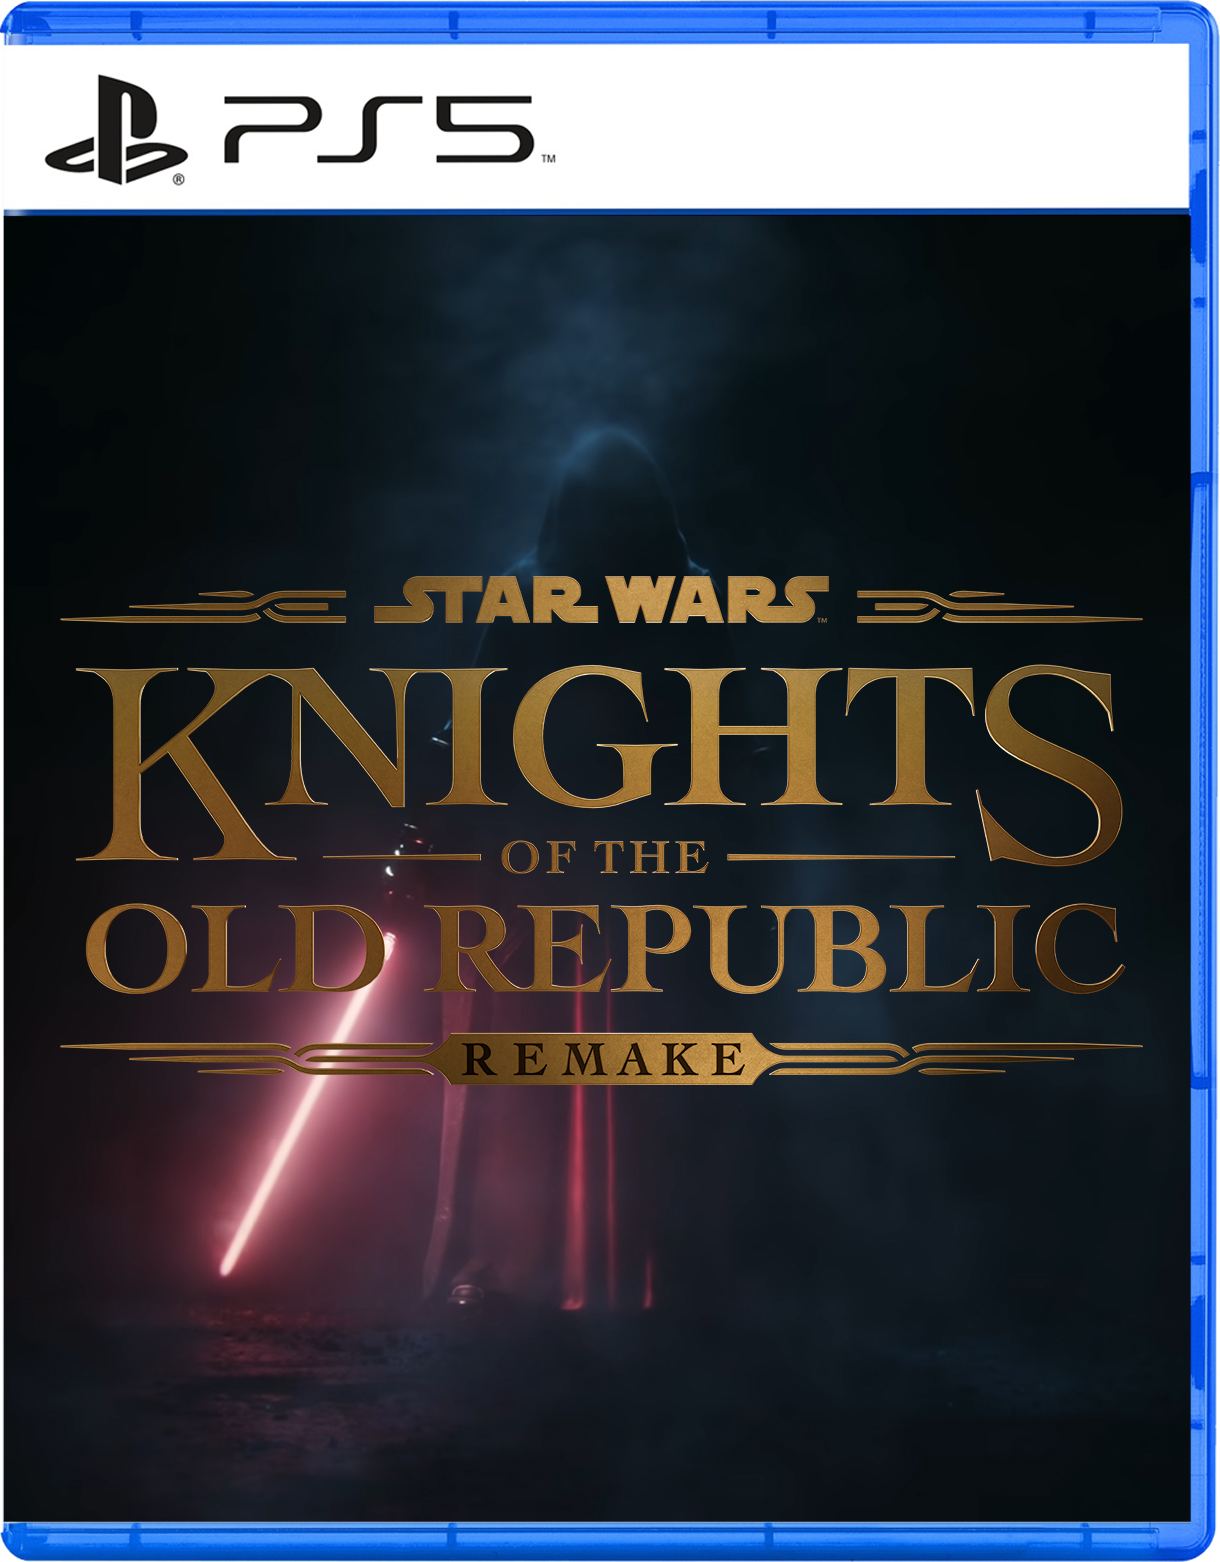 STAR WARS™: Knights of the Old Republic™